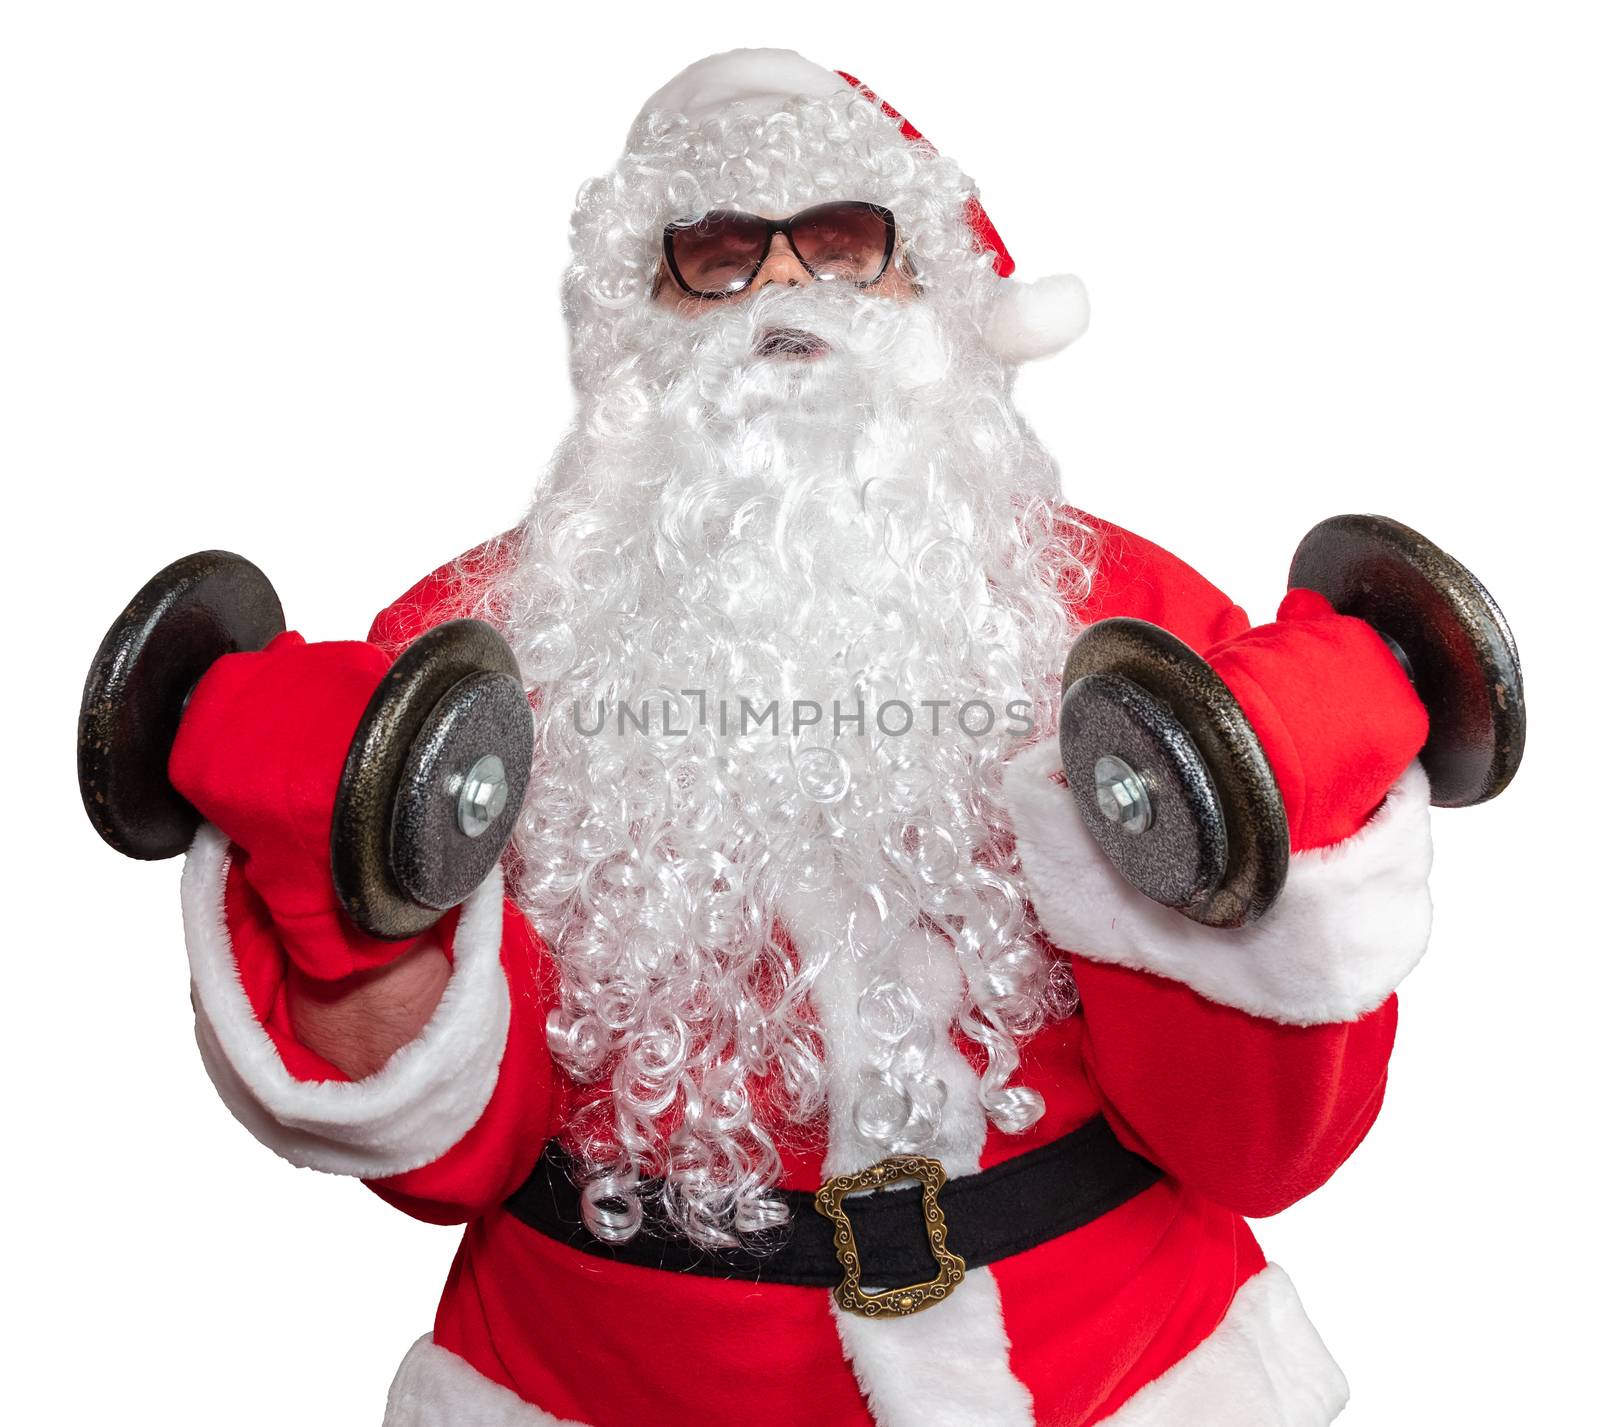 Santa Claus working out with two dumbbells and doing bicep curls. Santa is pushing it really hard. Santa wearing sunglasses and a long white beard. Isolated on white background.